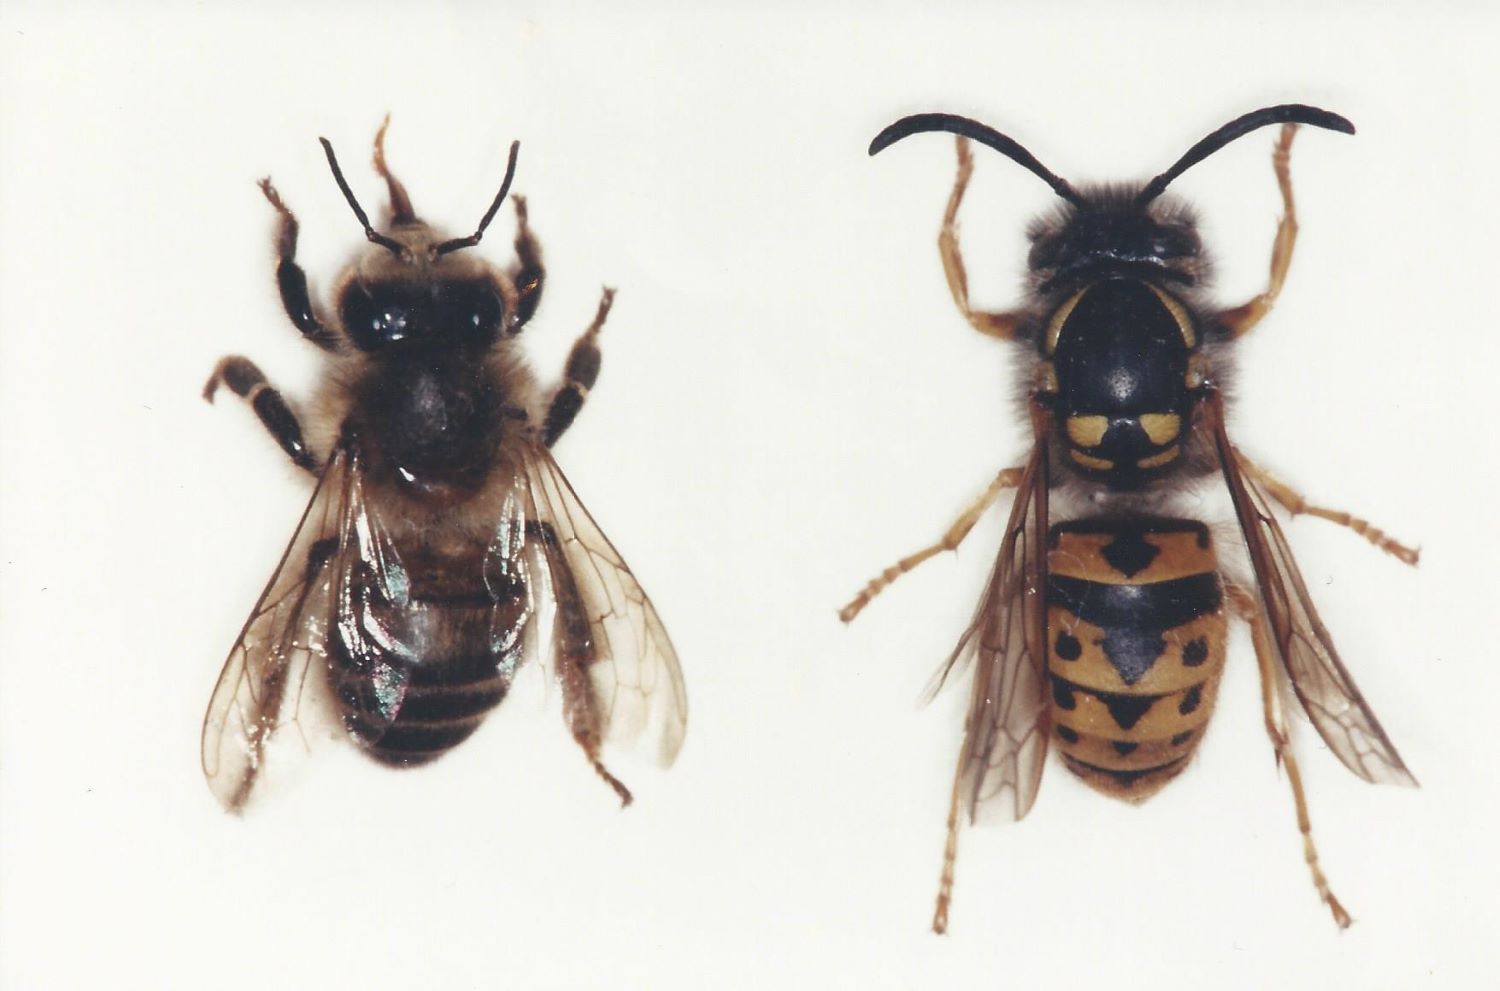 Close up photo of adult European honeybee and European wasp side by side on white background.